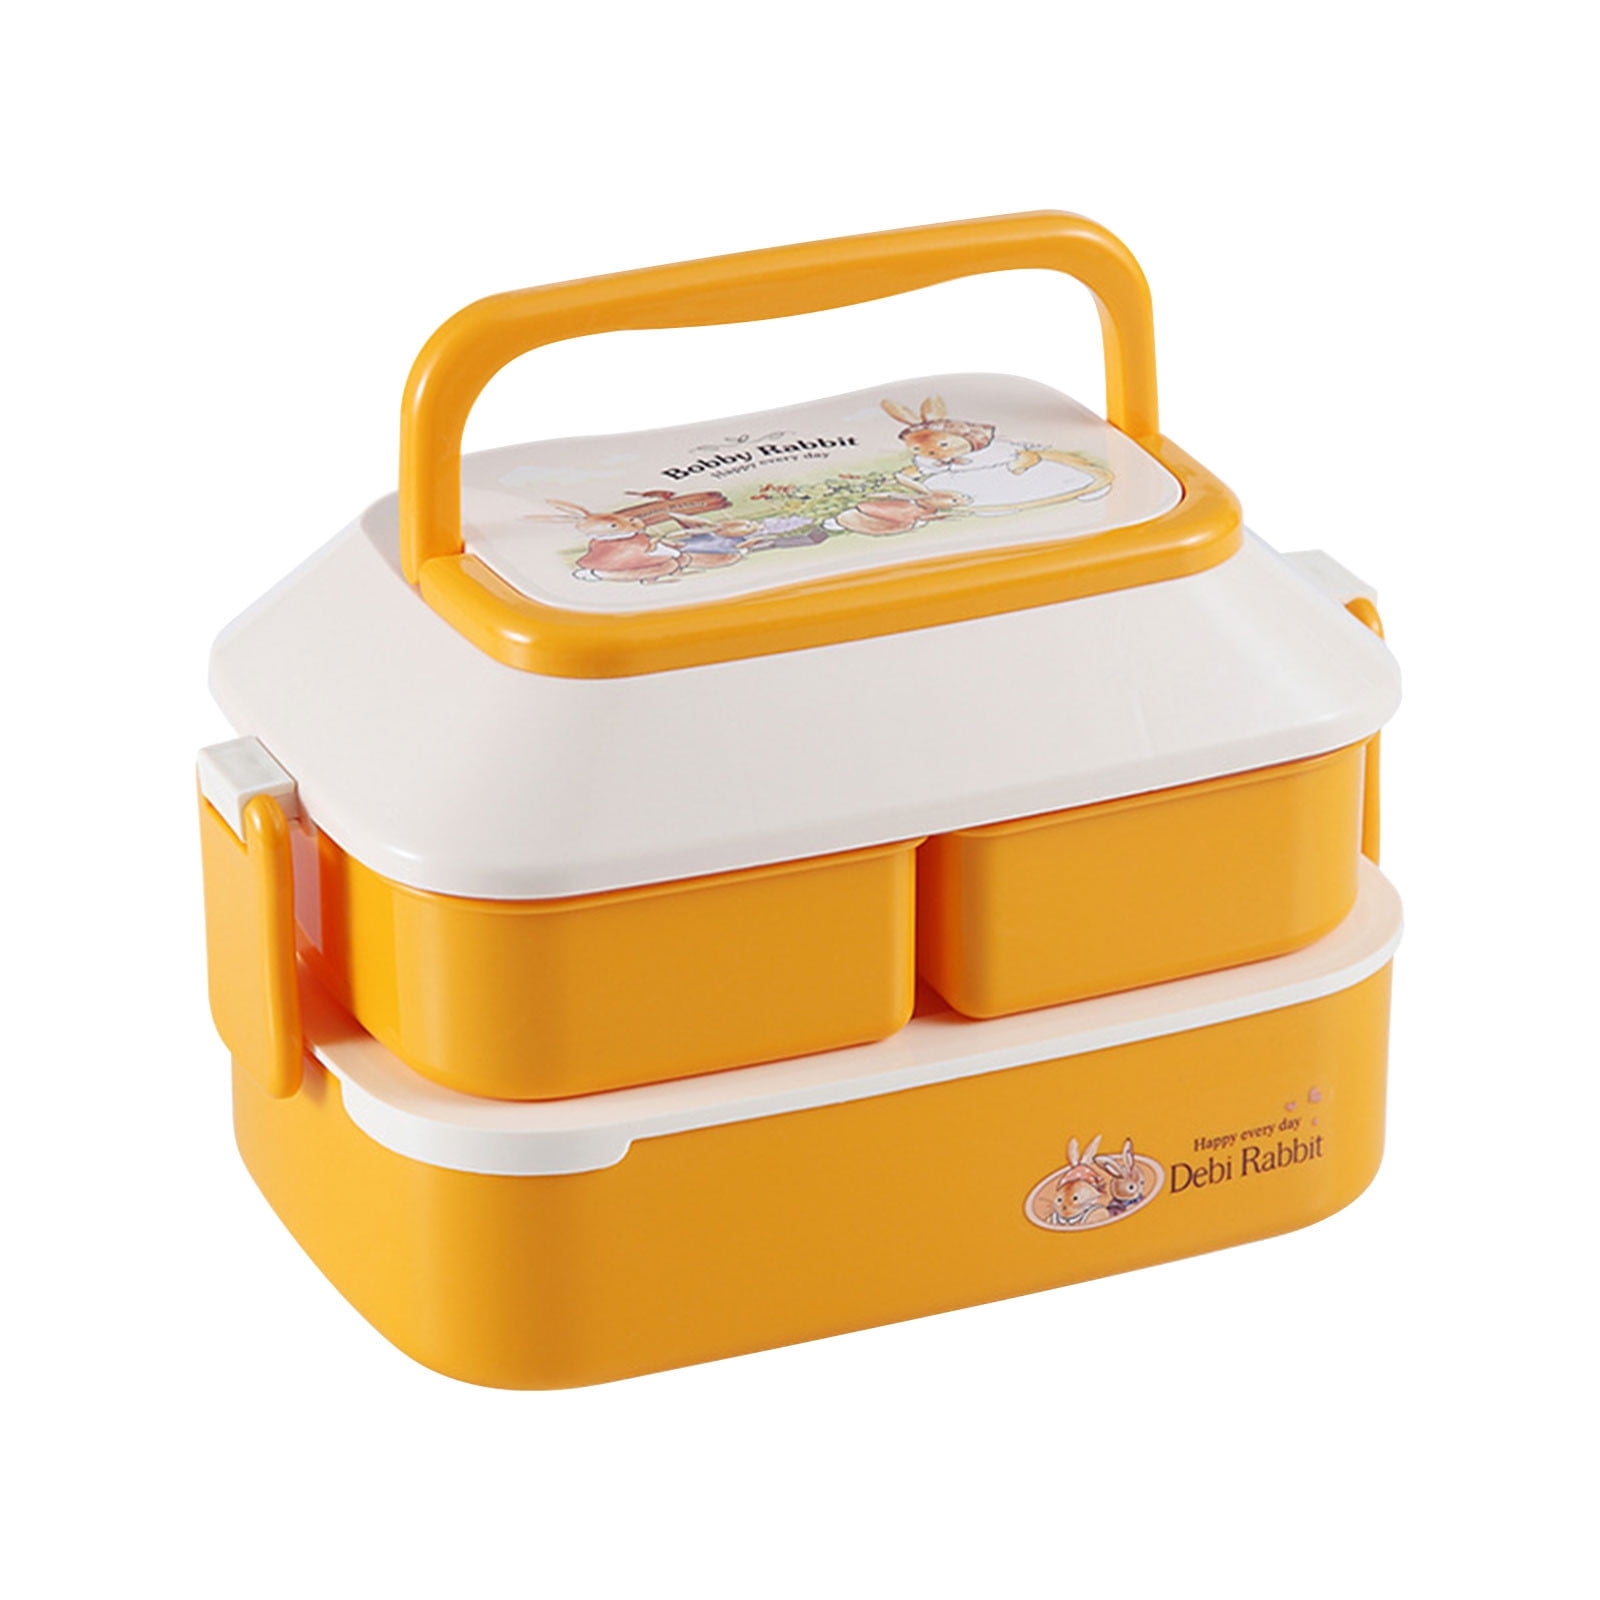 Layla MultiColor And Simple Lunch Box For Kids, Girls & Boys With